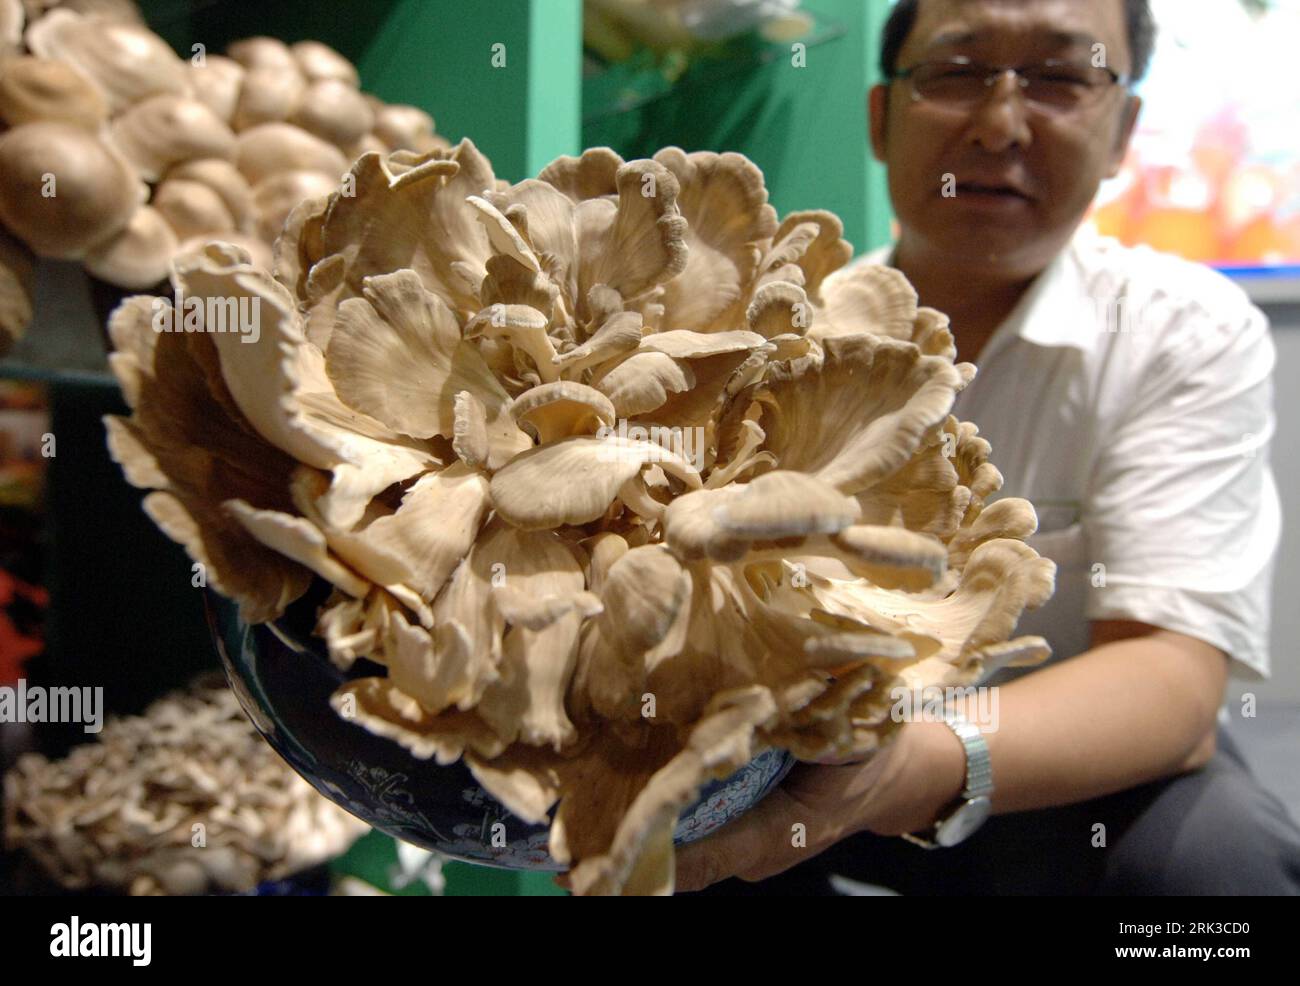 Bildnummer: 53433573  Datum: 26.09.2009  Copyright: imago/Xinhua (090926) -- LANGFANG (HEBEI), Sept. 26, 2009 (Xinhua) -- A staff member displays a mushroom during the 13th China Langfang Farm Products Fair in Langfang of north China s Hebei Province, Sept. 26, 2009. The three-day fair opened Saturday with over 1,000 participants around the country. (Xinhua/Gong Zhihong) (hdt) (3)CHINA-LANGFANG-FARM PRODUCTS-FAIR (CN) PUBLICATIONxNOTxINxCHN Landwirtschaft Wirtschaft Kbdig xdp 2009 quer o0 Messe Landwirtschaftsmesse    Bildnummer 53433573 Date 26 09 2009 Copyright Imago XINHUA  Lang Fang Hebei Stock Photo